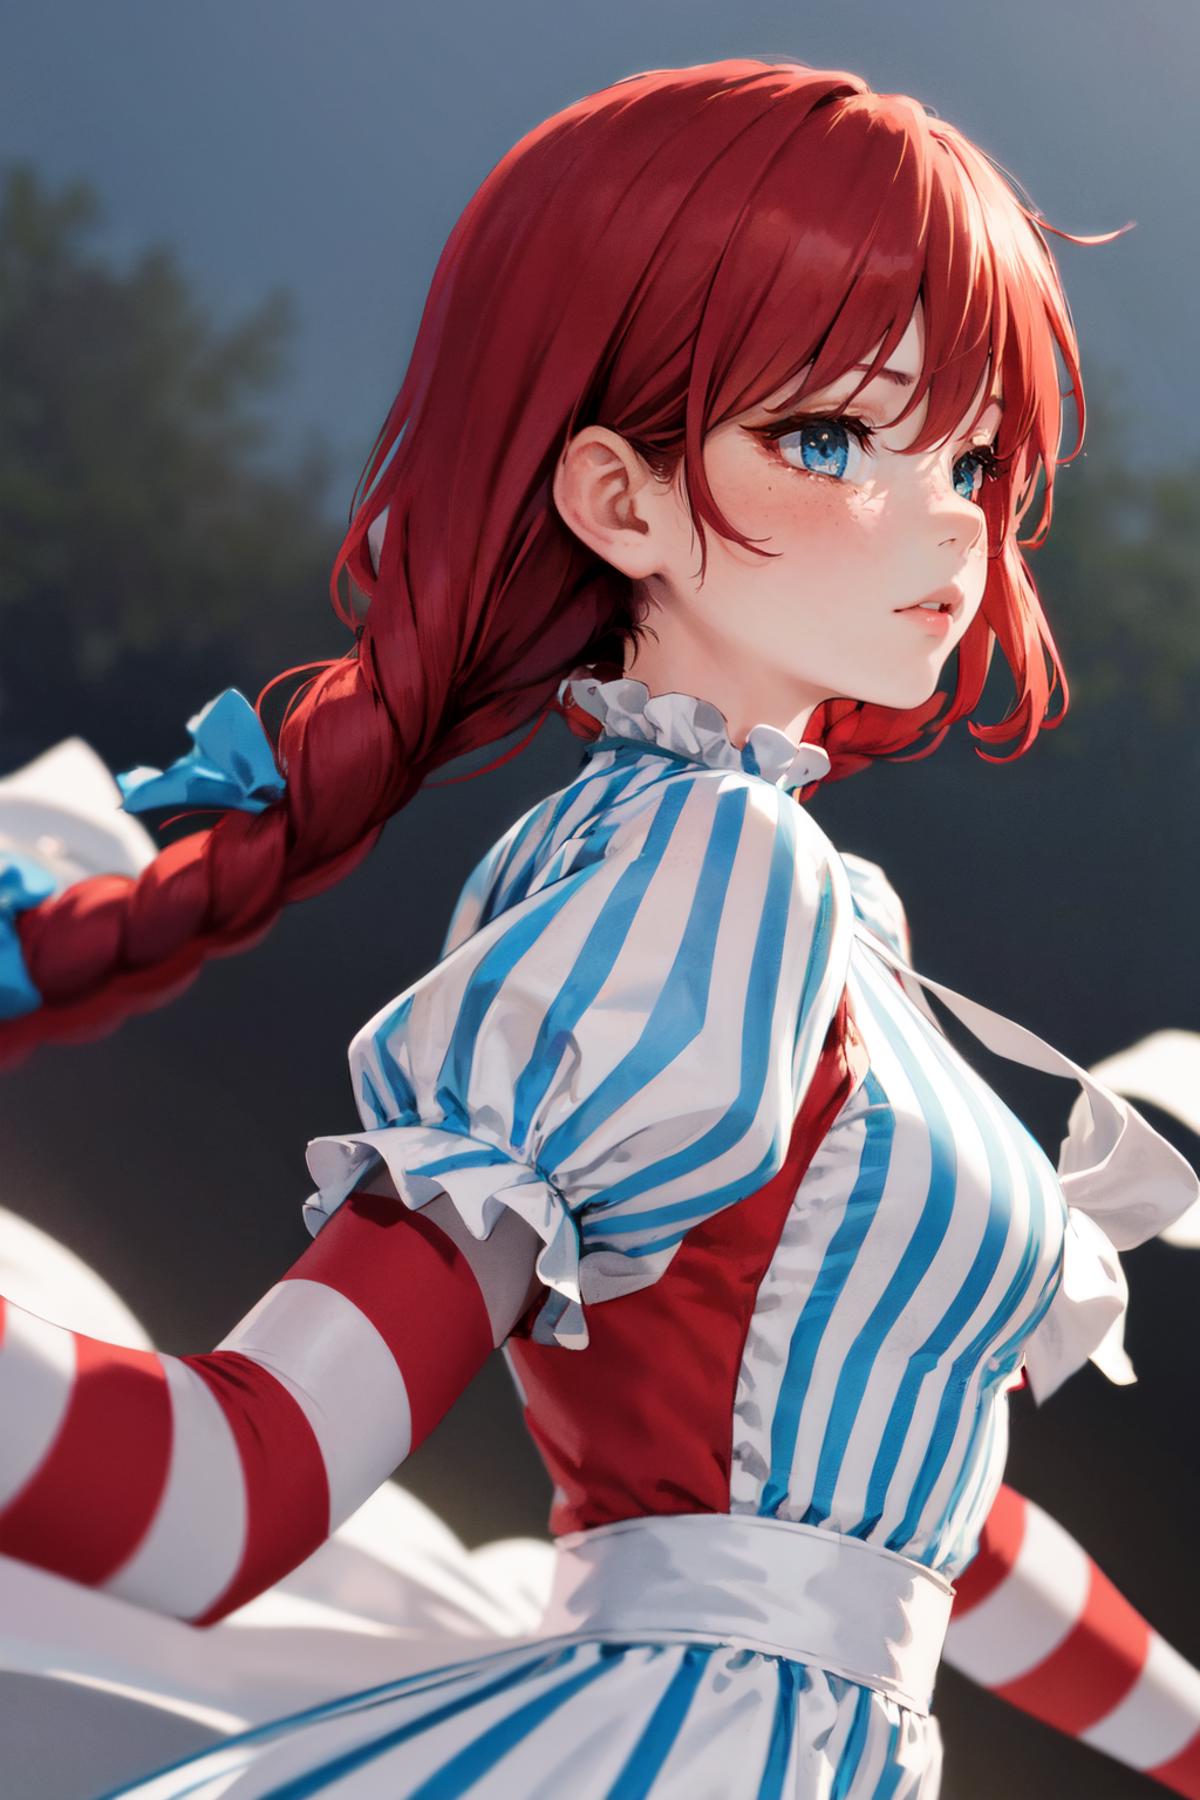 Wendy | Wendy's image by Shippy